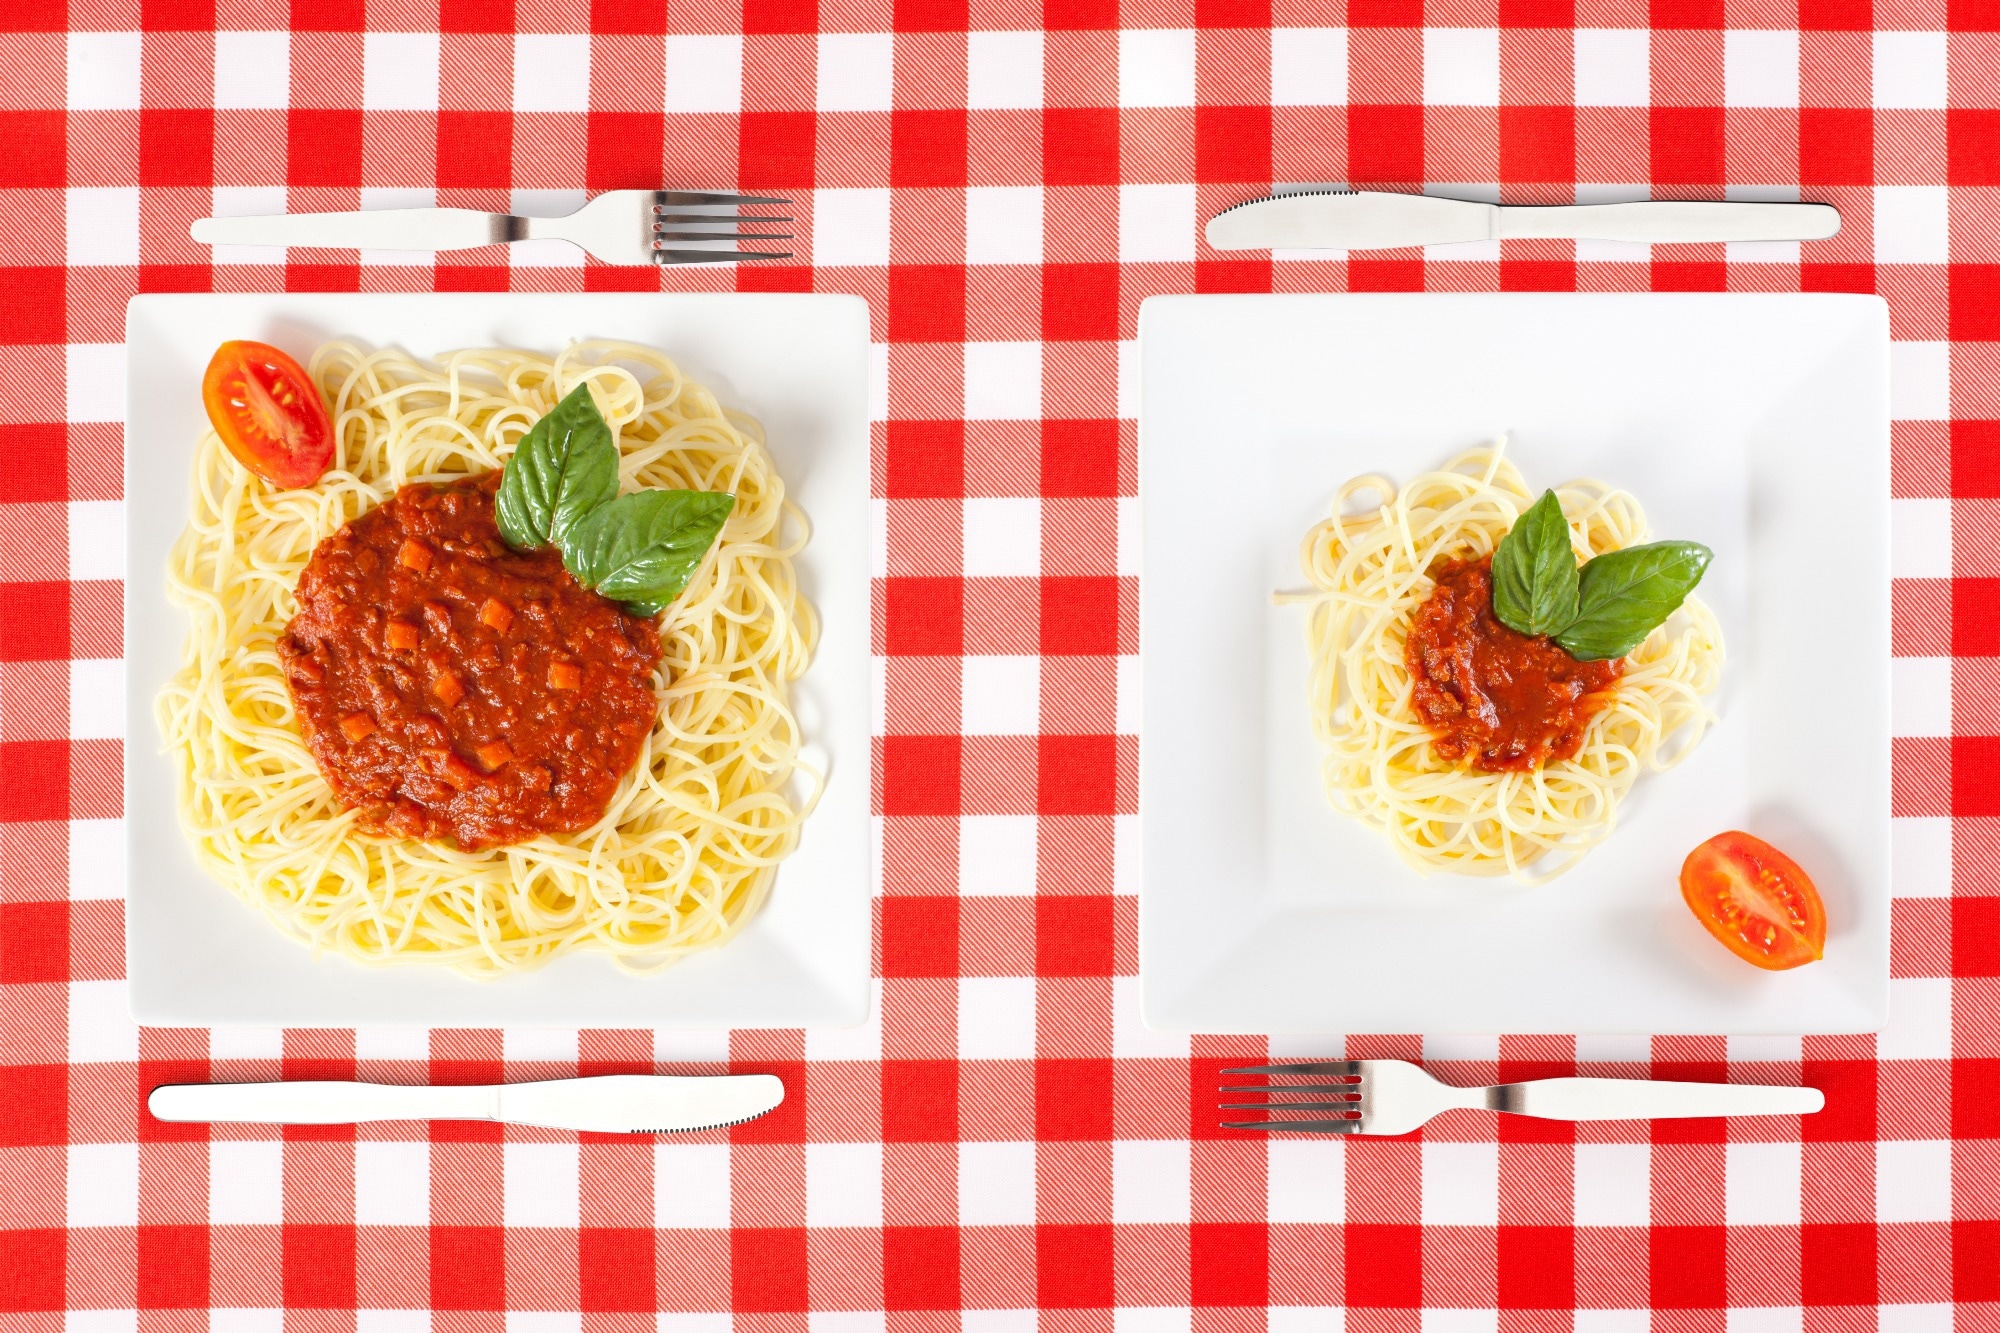 Study: Role of Portion Size in the Context of a Healthy, Balanced Diet: A Case Study of European Countries. Image Credit: Jose Luis Stephens / Shutterstock